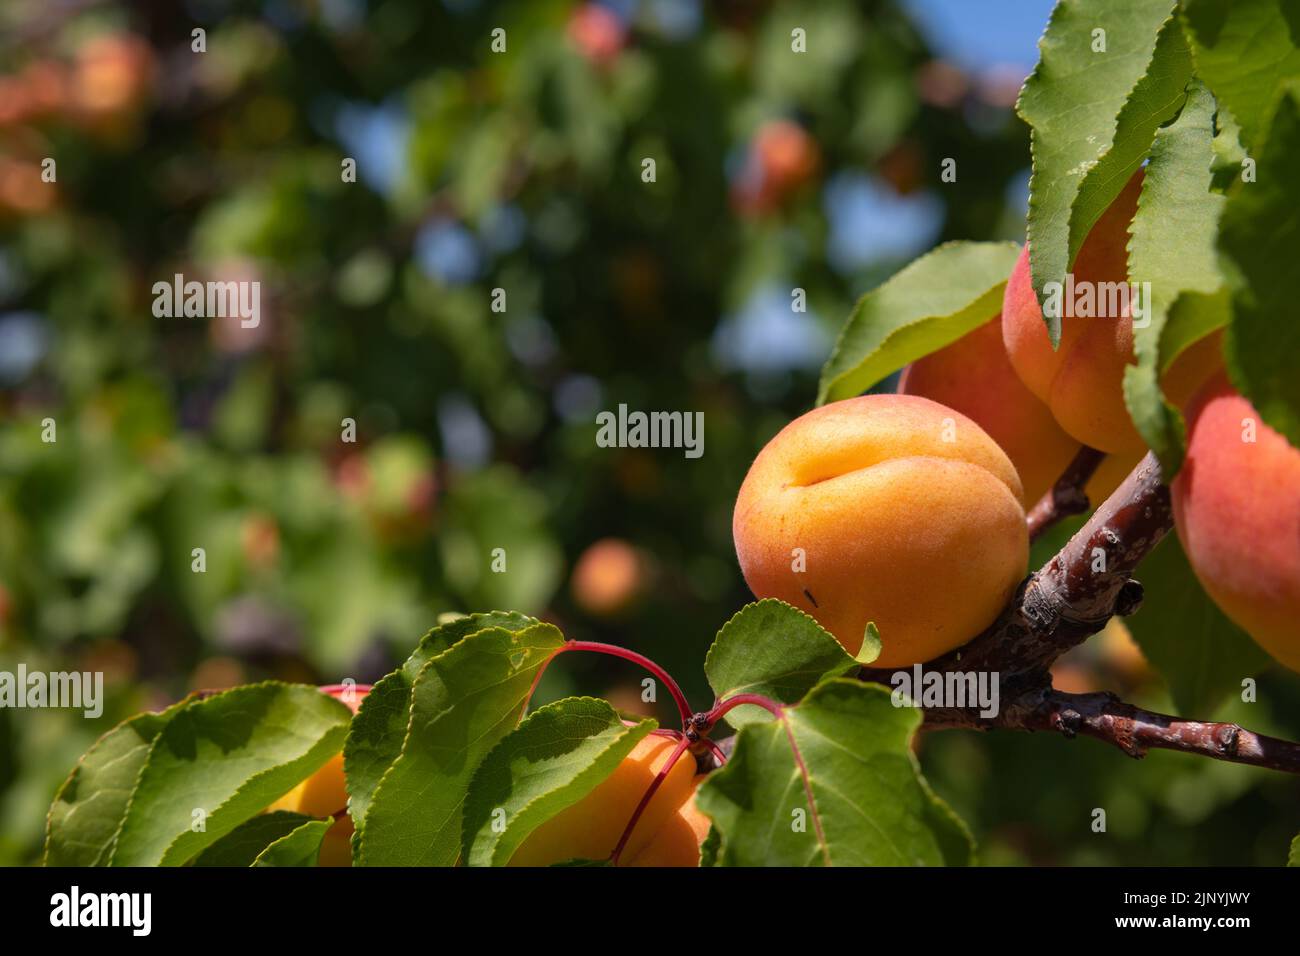 Apricot. An apricot on the branch in focus. Summer fruits. Organic raw fruits. Stock Photo